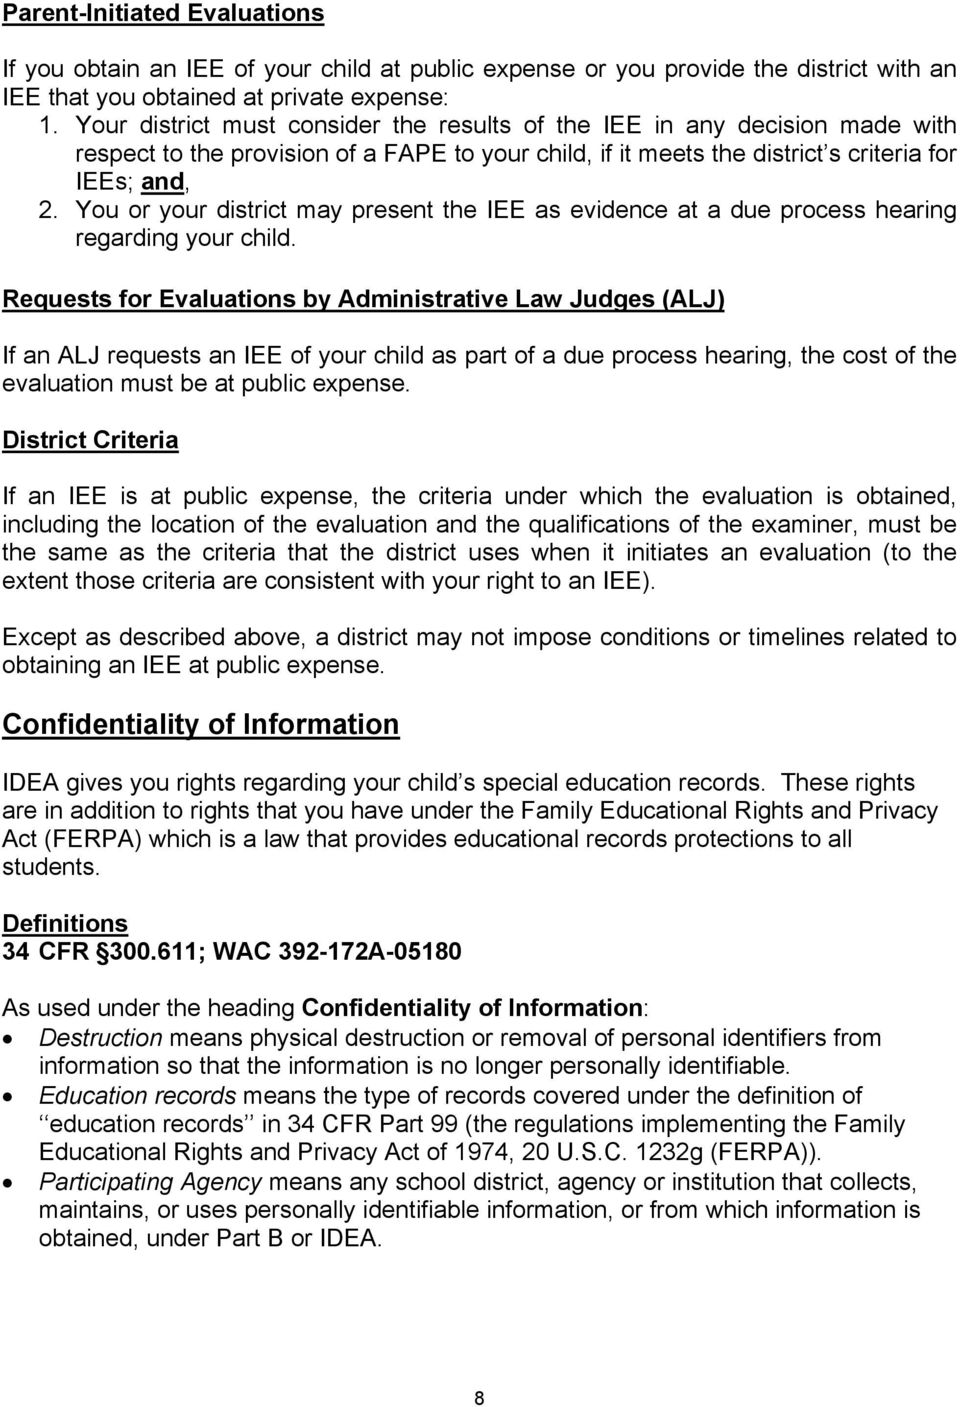 You or your district may present the IEE as evidence at a due process hearing regarding your child.